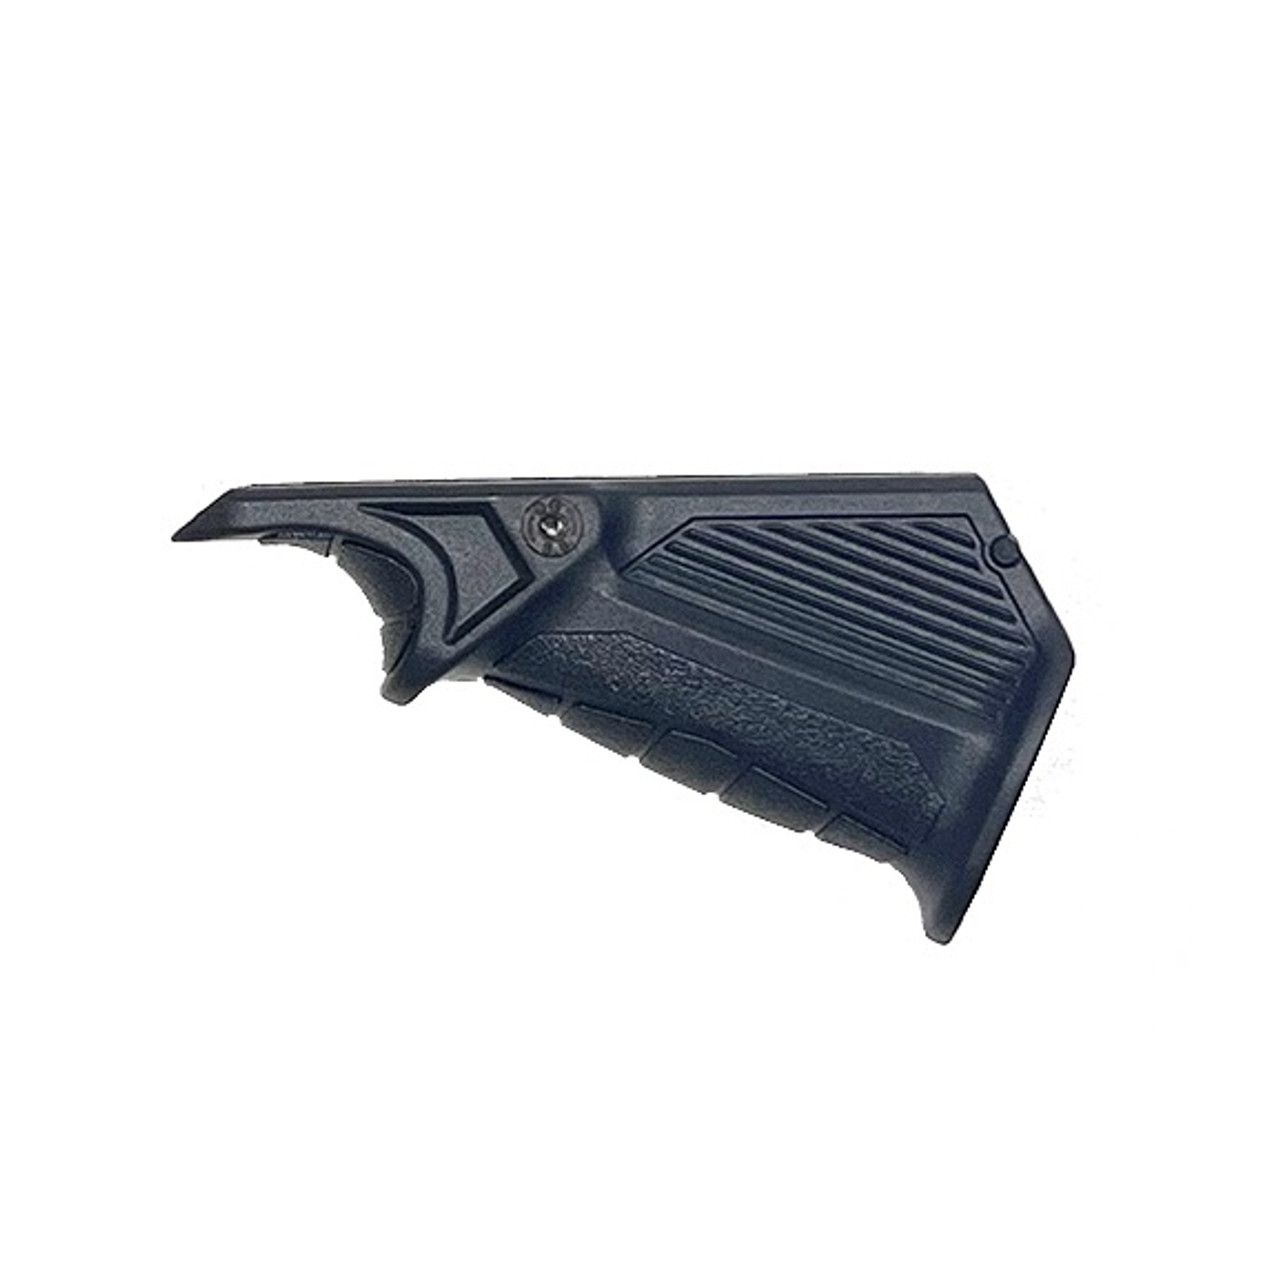 NcSTAR VG049 1913 Picatinny Ergonomic Angled Foregrip With Storage, Black